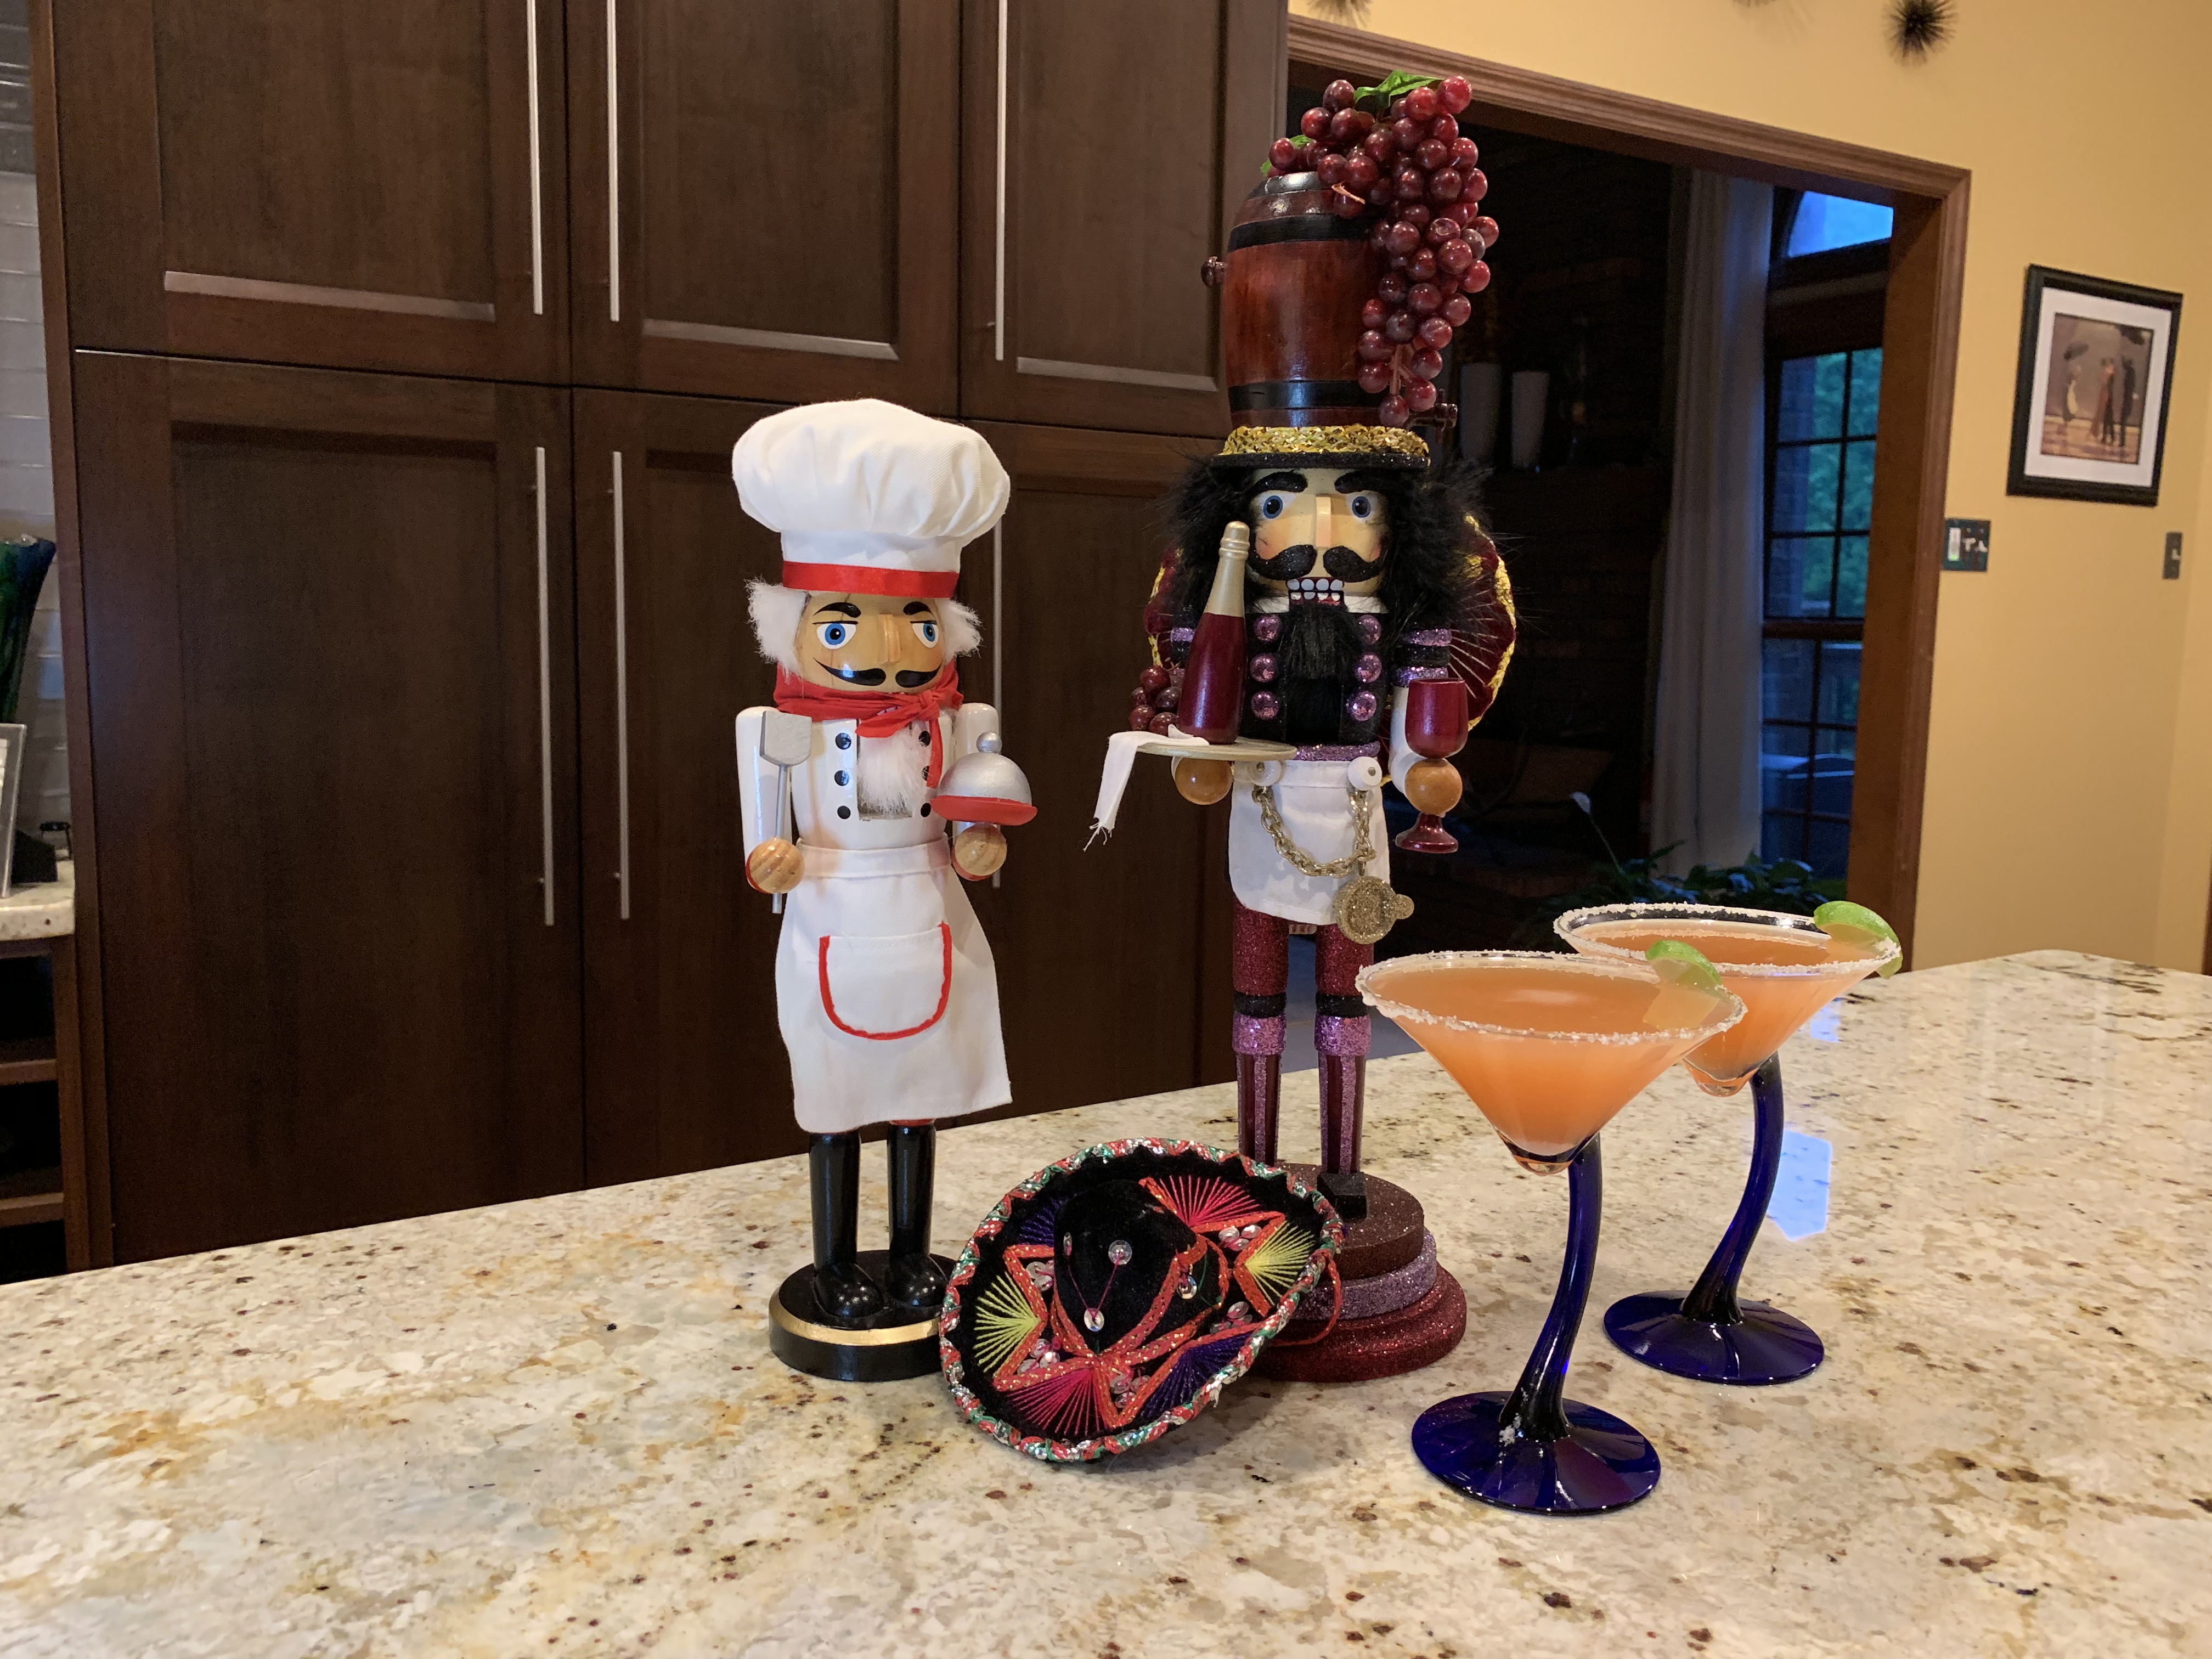 Two nutcrackers, a tiny sombrero and two orange colored cocktails in martini glasses.